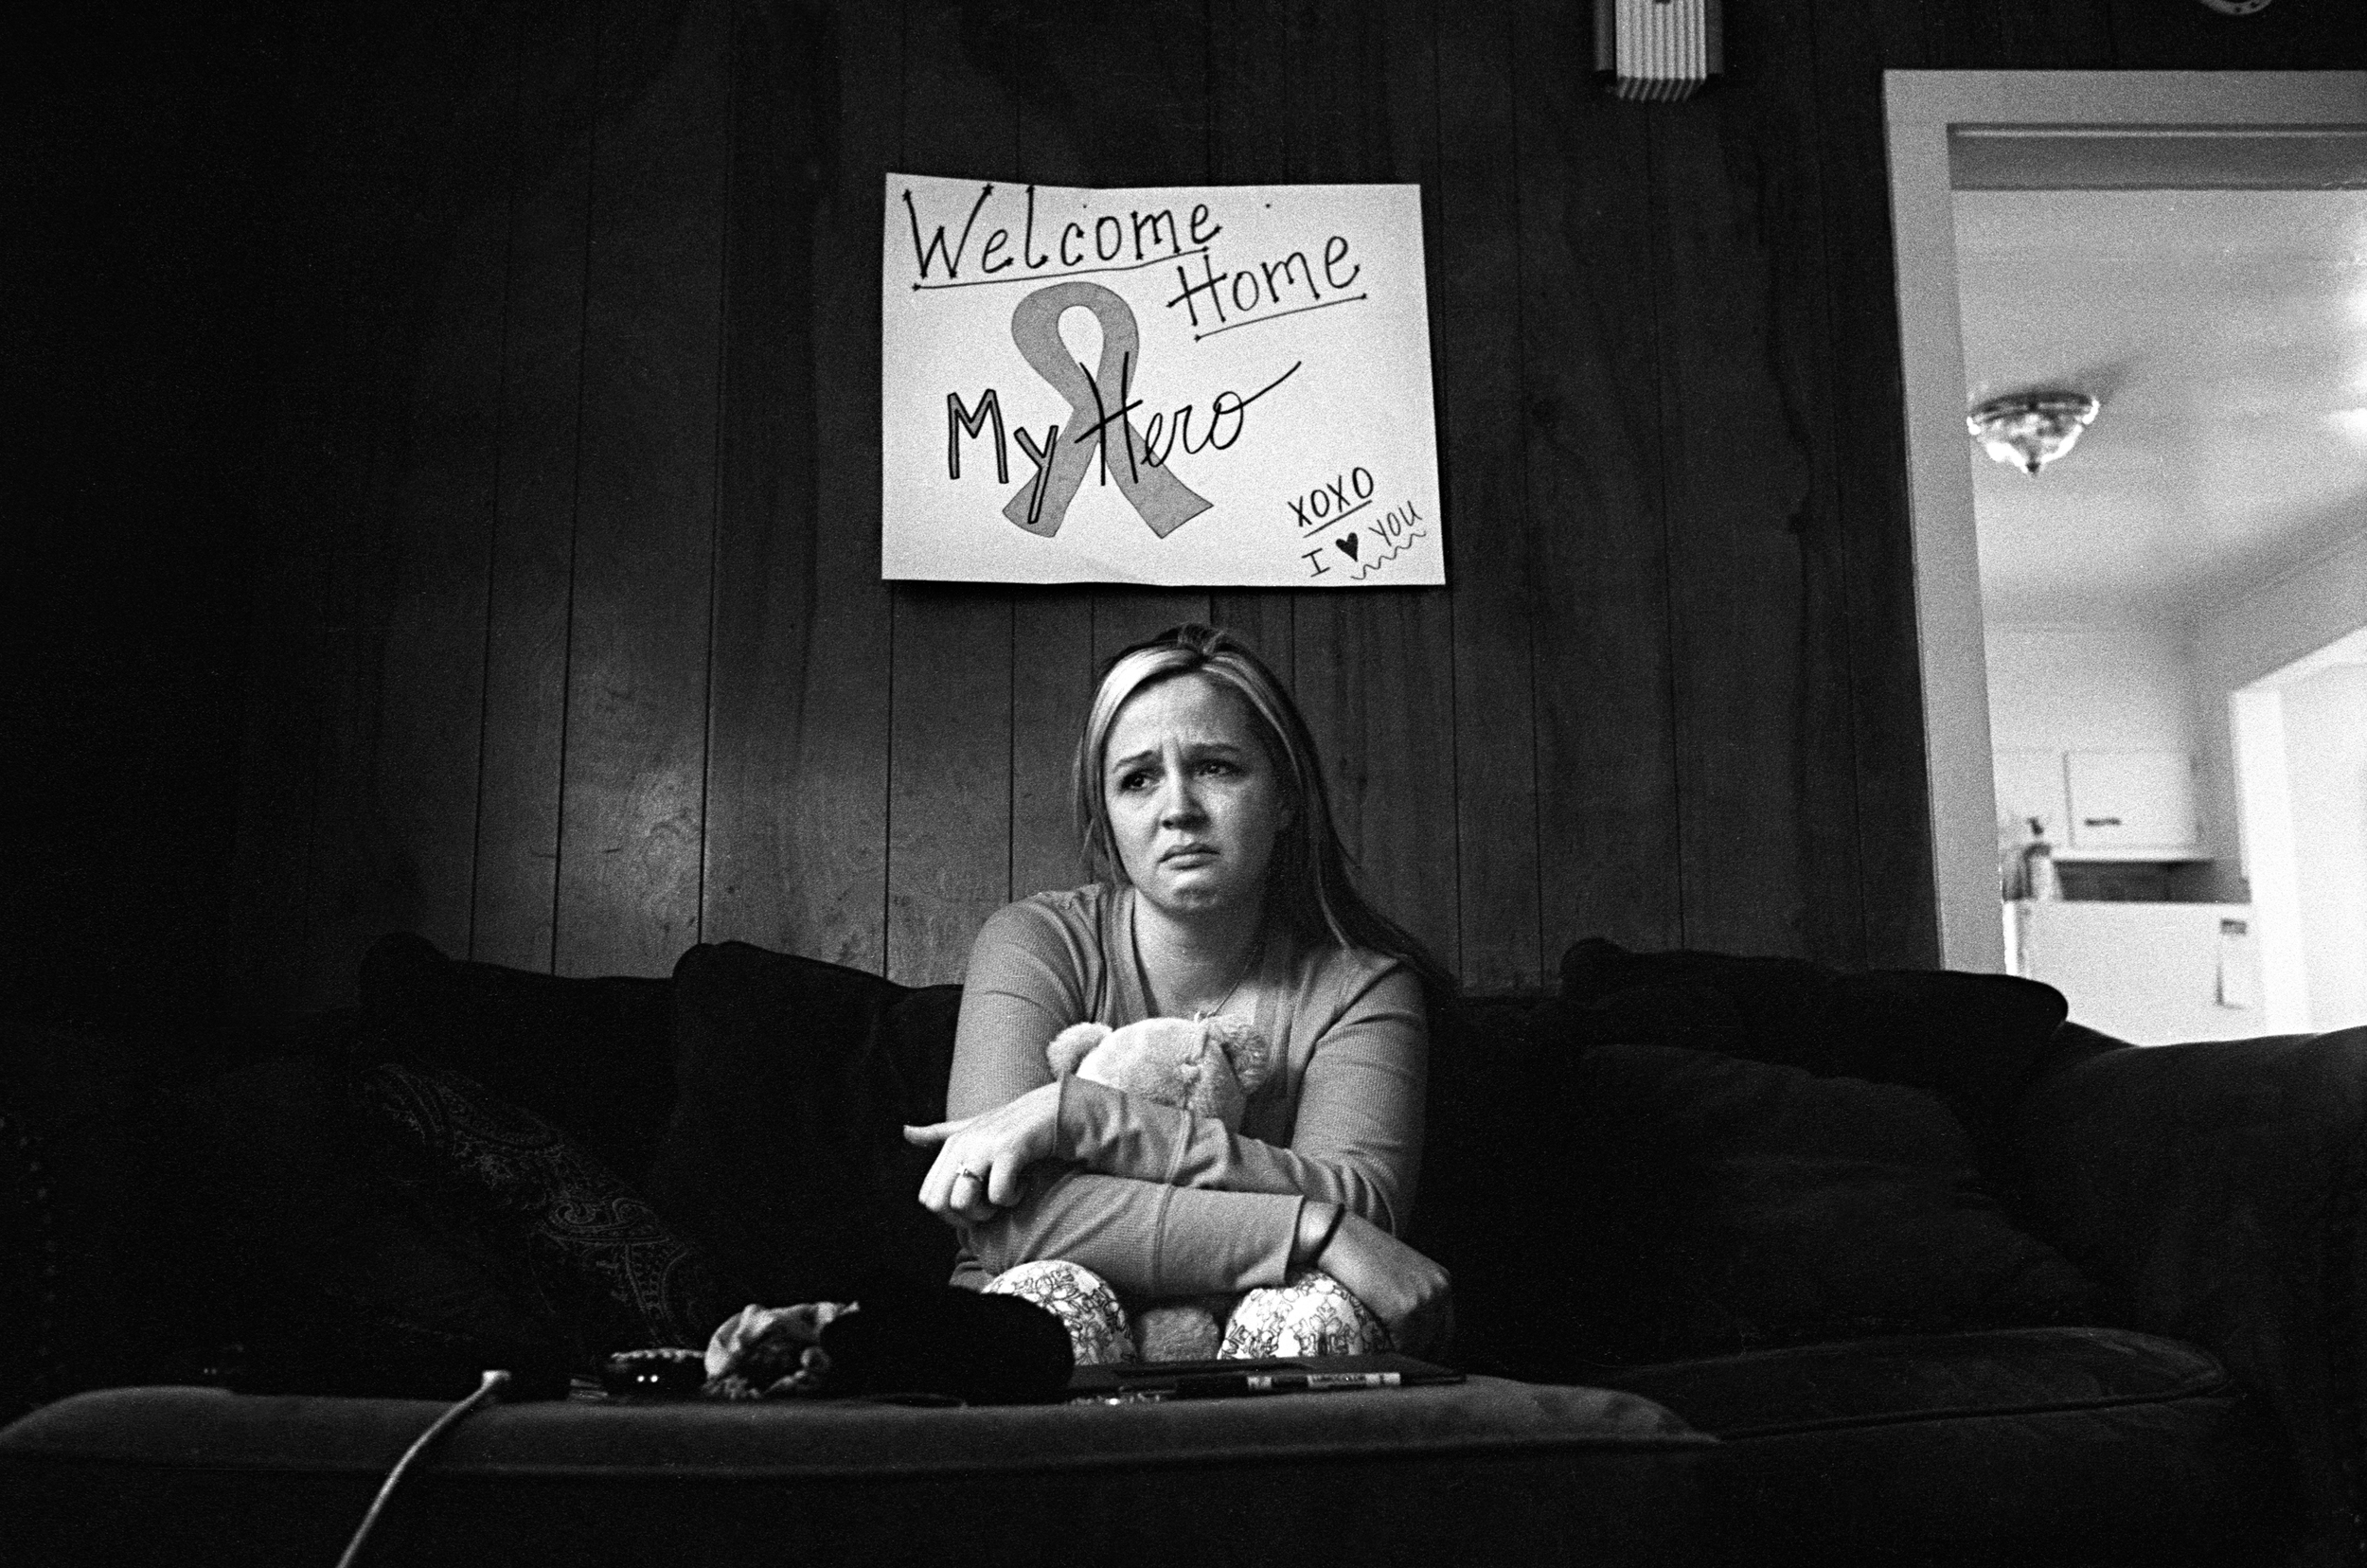  Stefanie Strausser cries under a "welcome home" sign she made for her fiancé&nbsp;SSG Cody Anderson, 25,&nbsp;who was found dead in his apartment in Watertown, New York, 2010. 